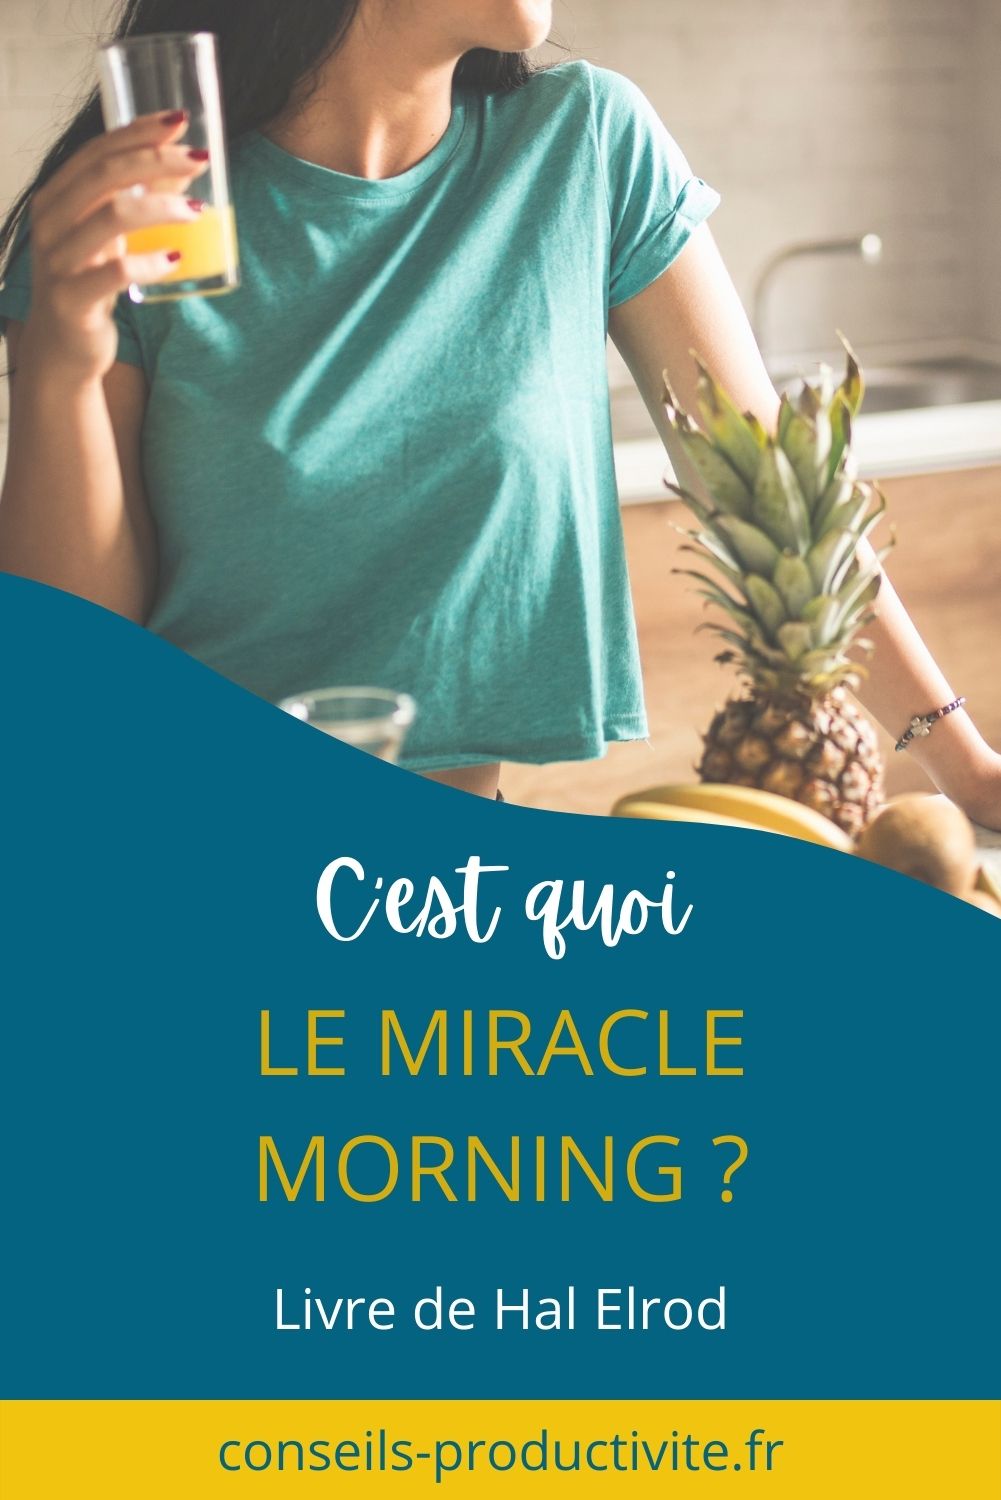 cest-quoi-le-miracle-morning